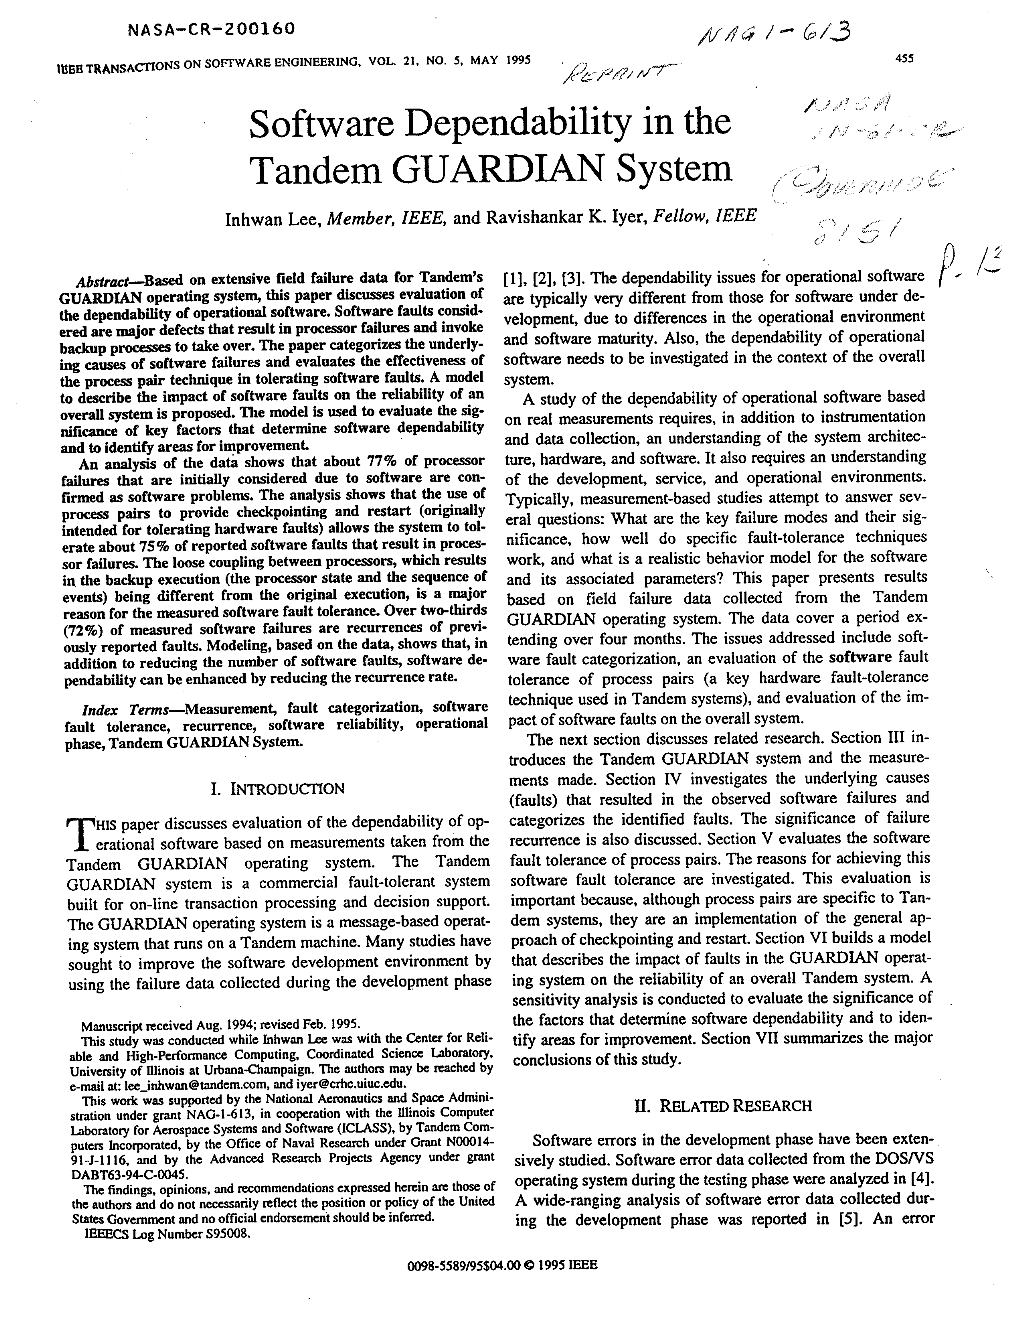 Software Dependability in the Tandem GUARDIAN System